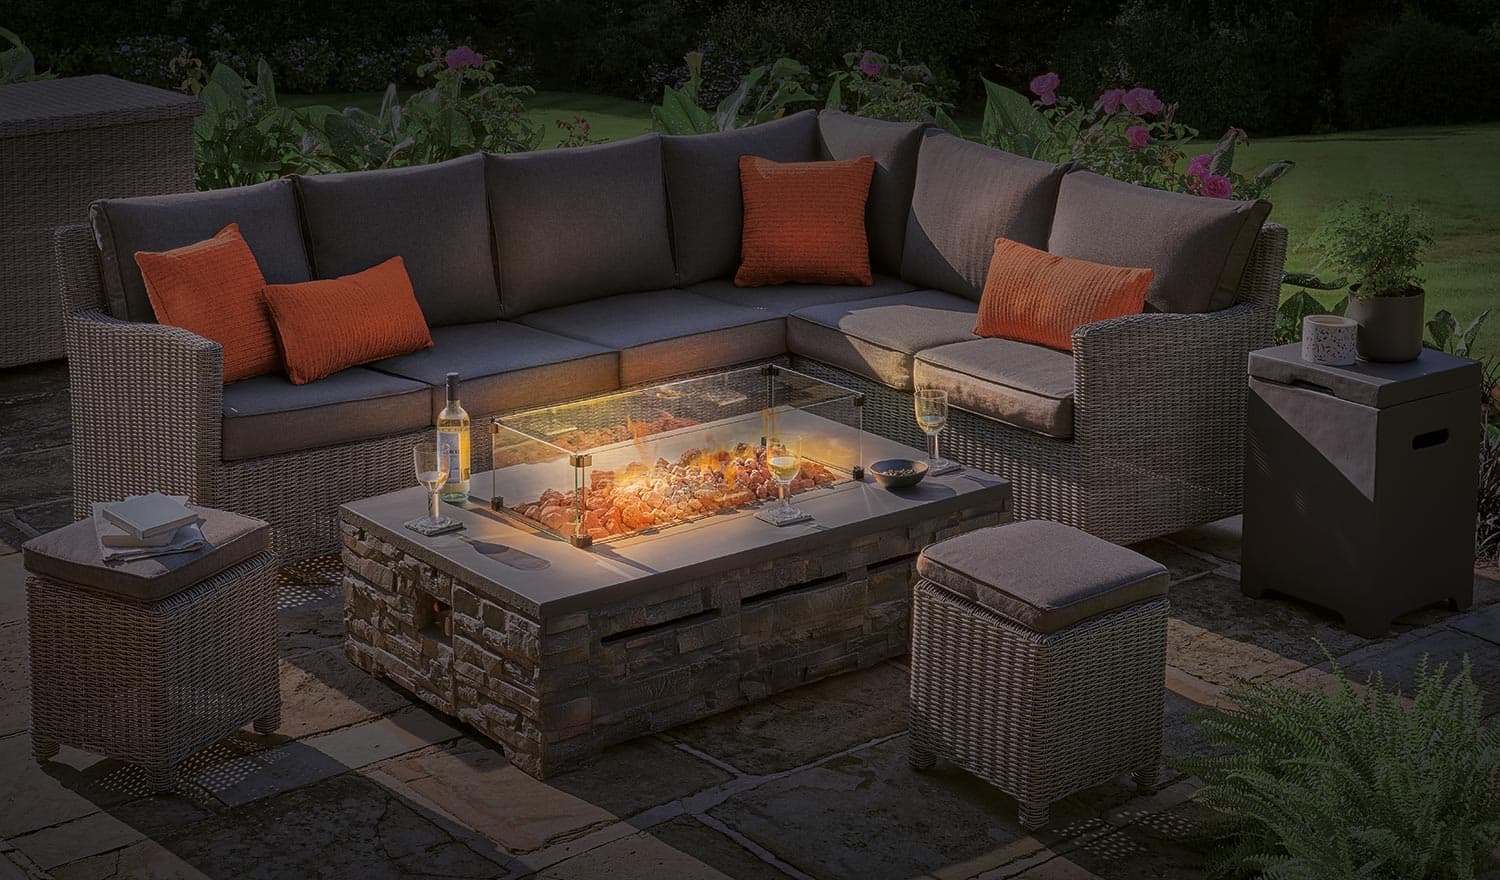 Stone Fire Pit Coffee Table 132 X 85cm, Patio Dining Set With Built In Fire Pit